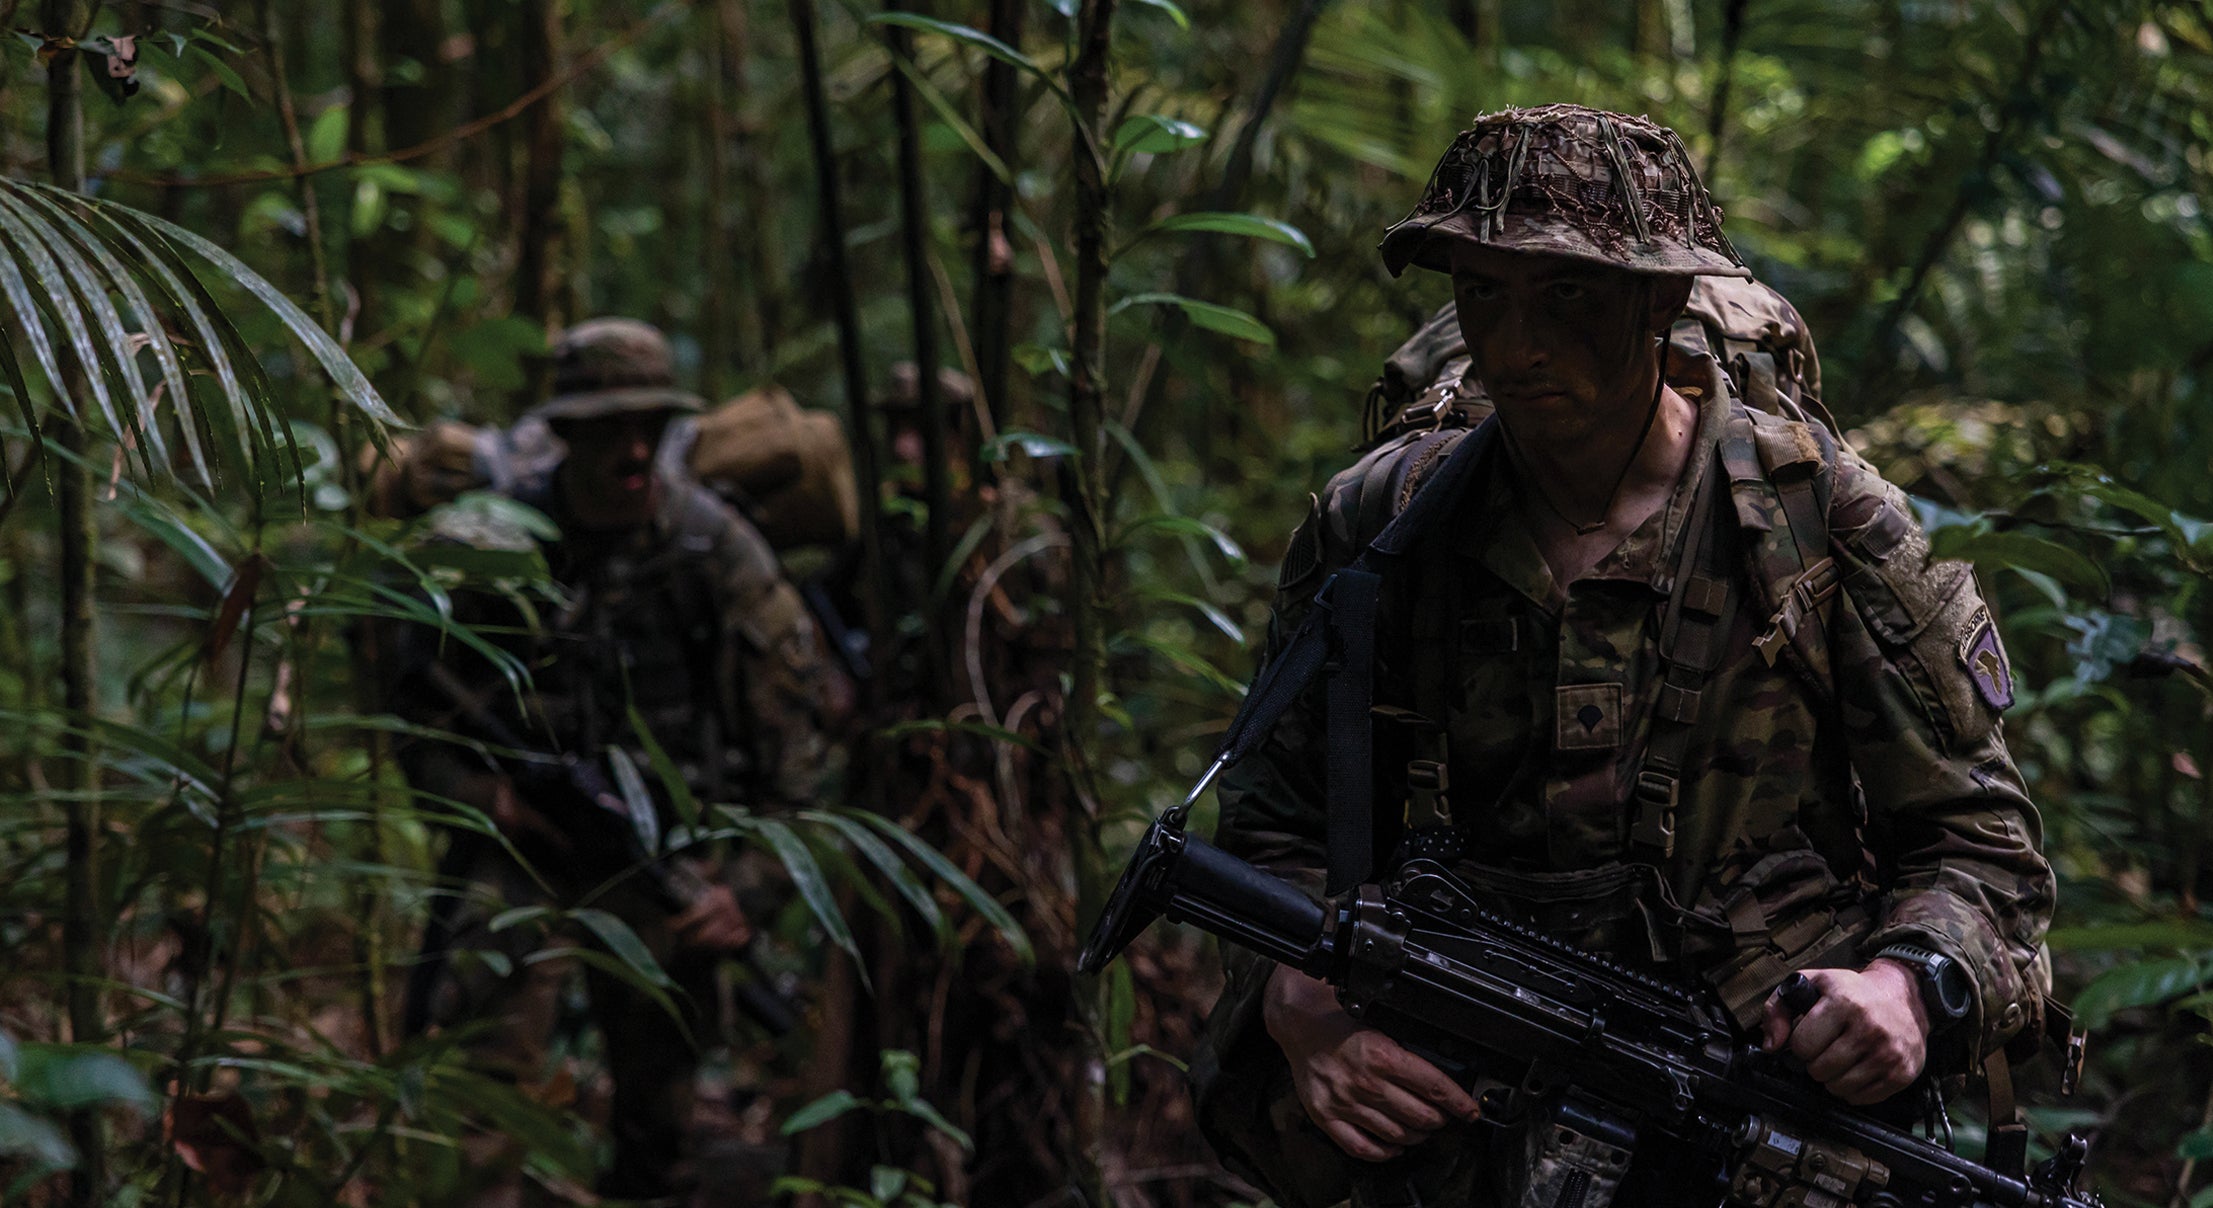 Two U.S. Army soldiers walking through dense jungle